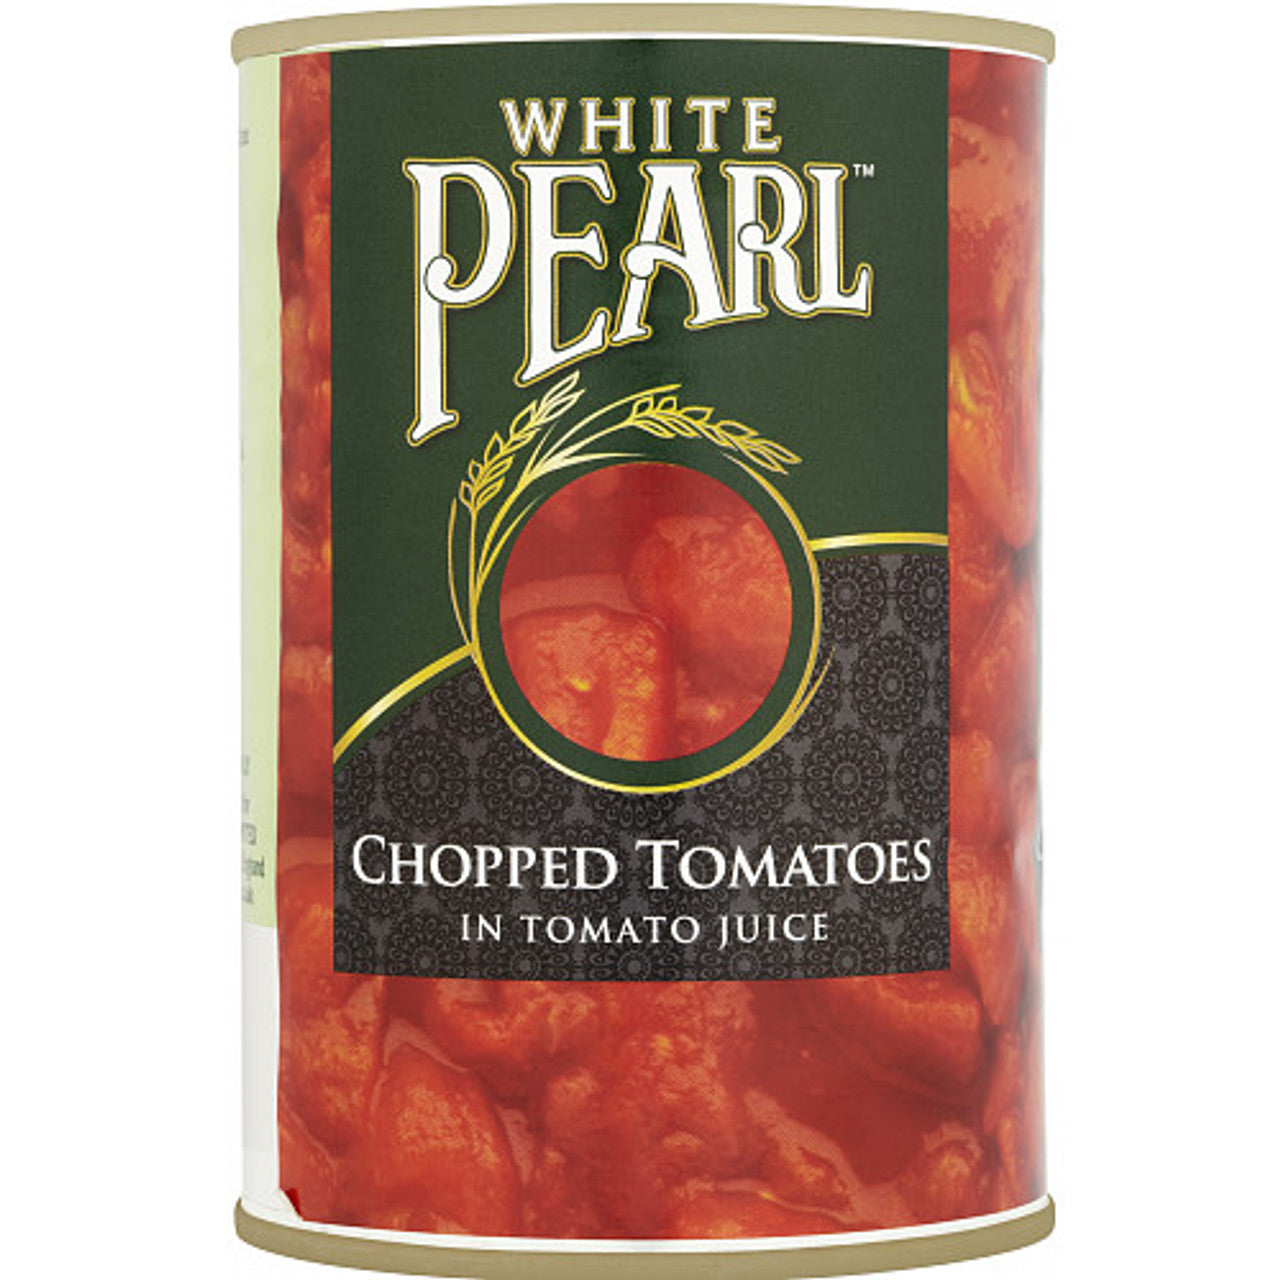 White Pearl Chopped Tomatoes in Tomato Juice 400g